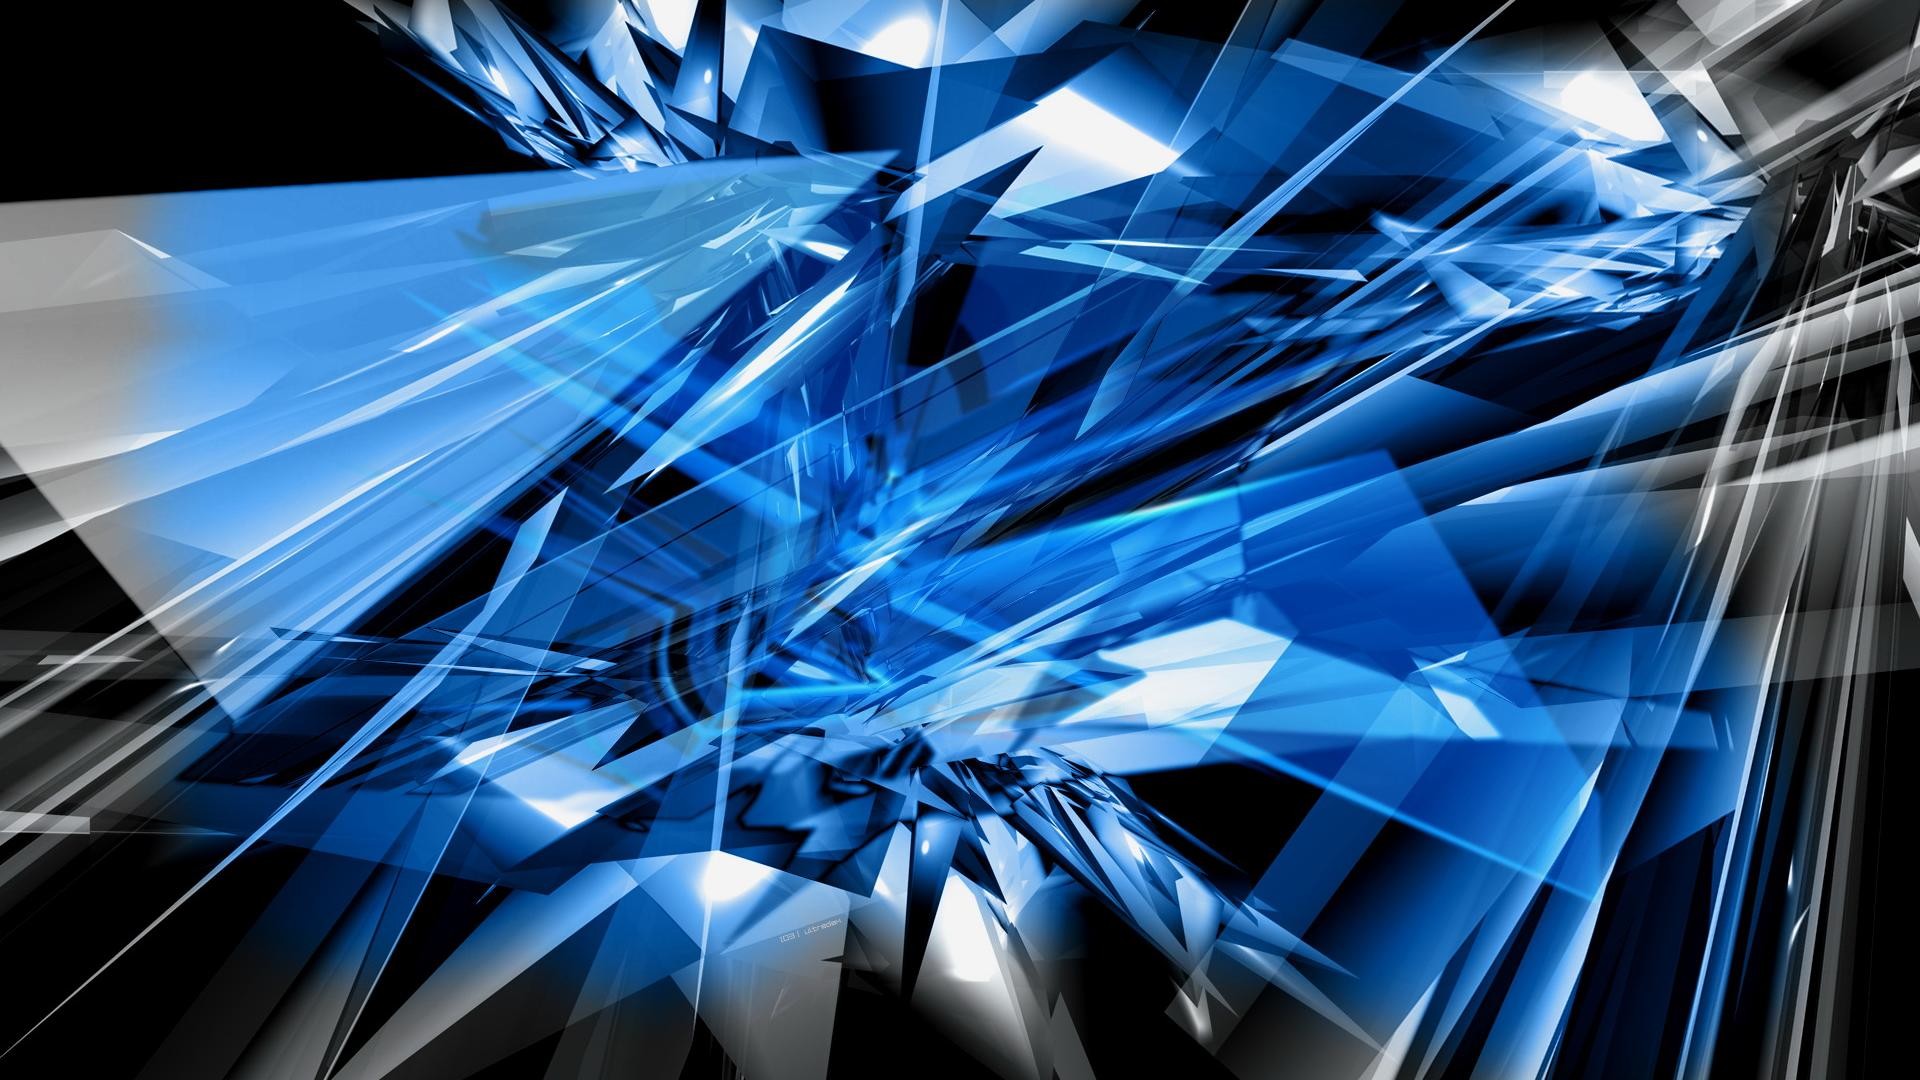 1920x1080  Abstract blue design backgrounds wide wallpapers:1280x800,1440x900,1680x1050  - hd backgrounds